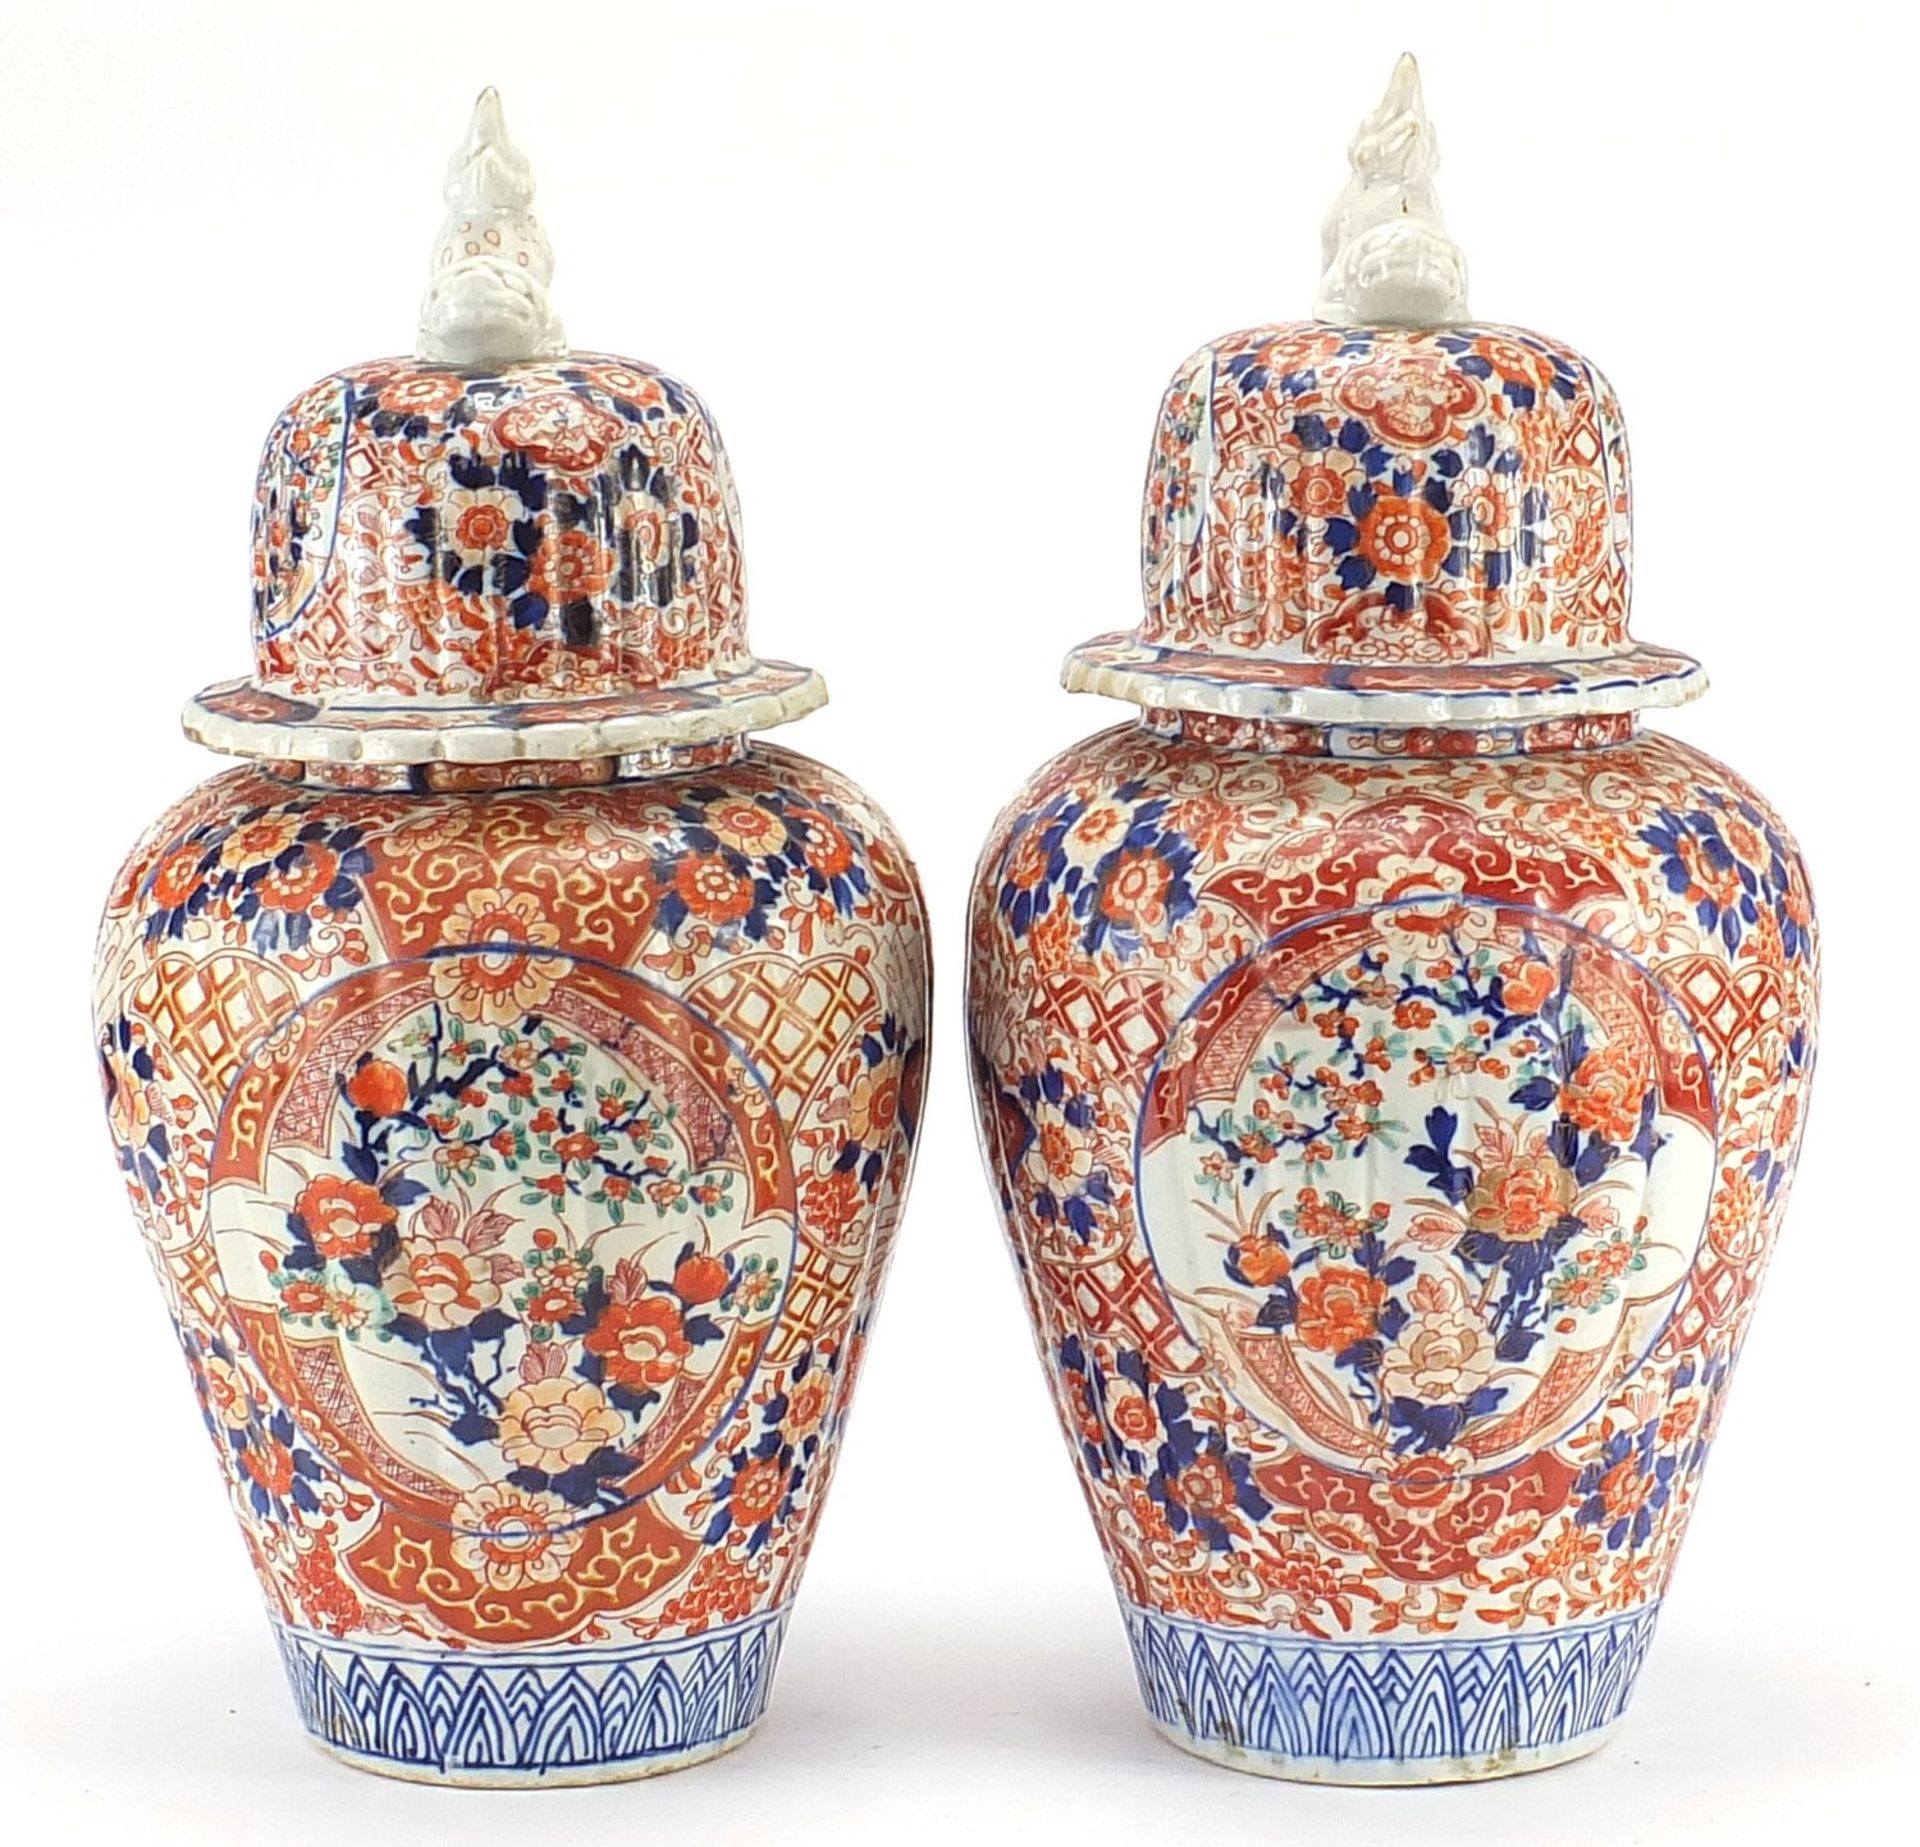 Large pair of Japanese Imari lidded porcelain vases, each profusely hand painted with flowers,